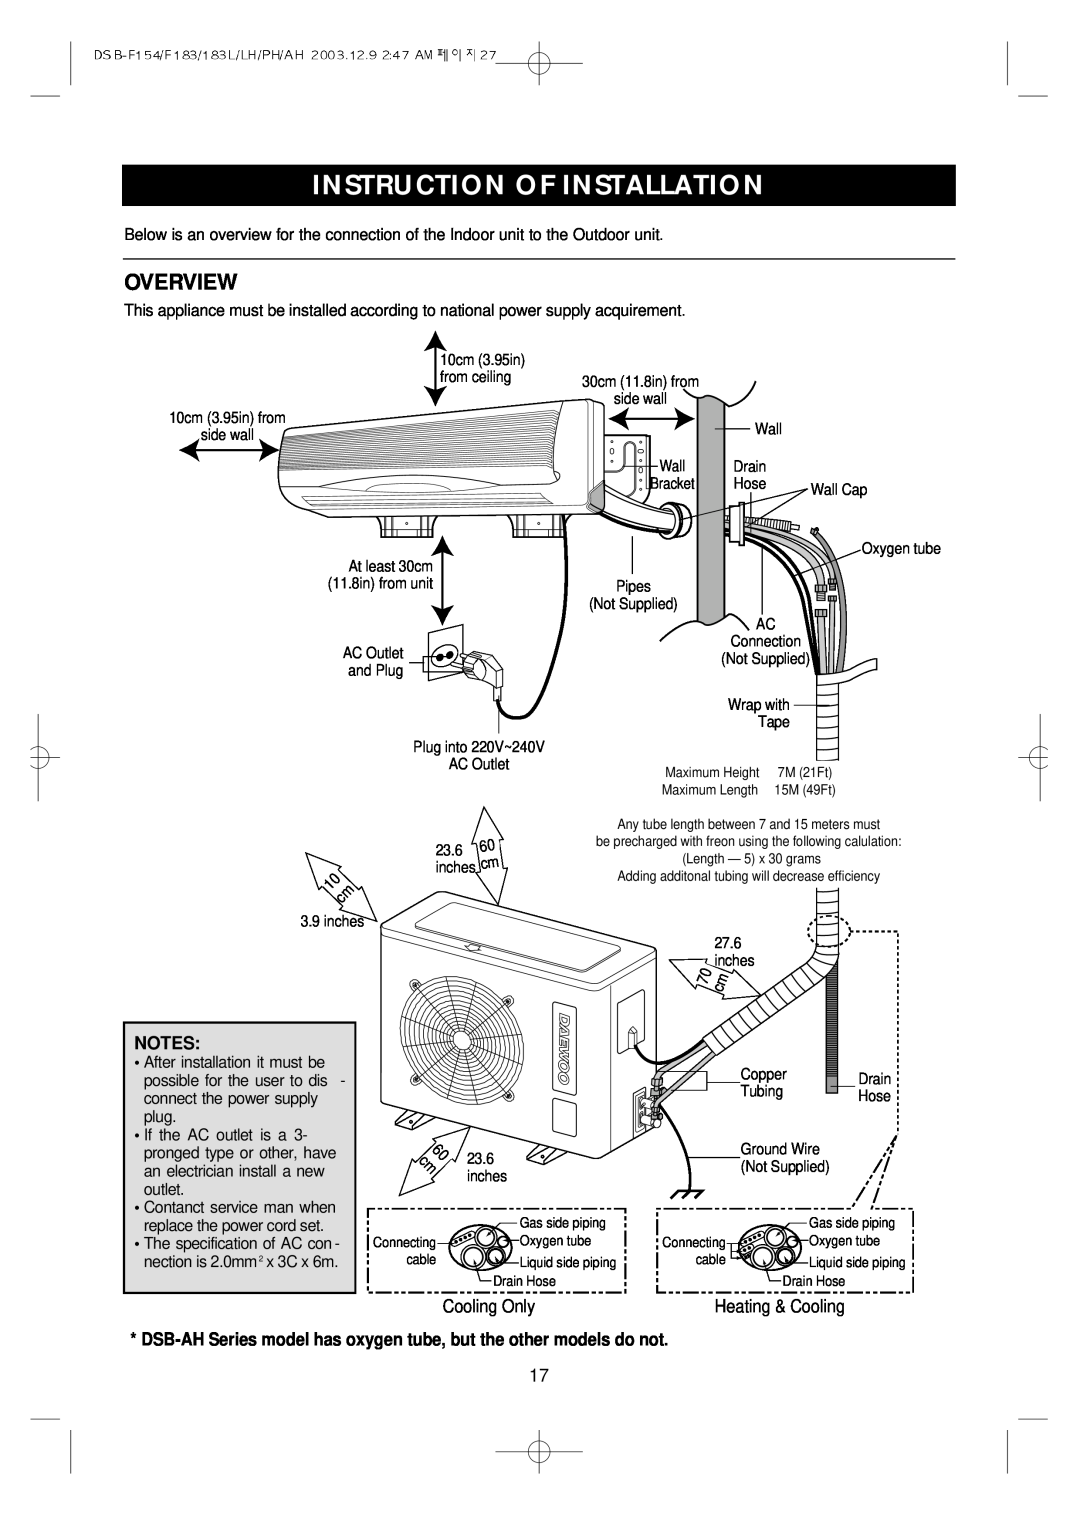 Daewoo DSB-F154LH owner manual Instruction Of Installation, Overview 